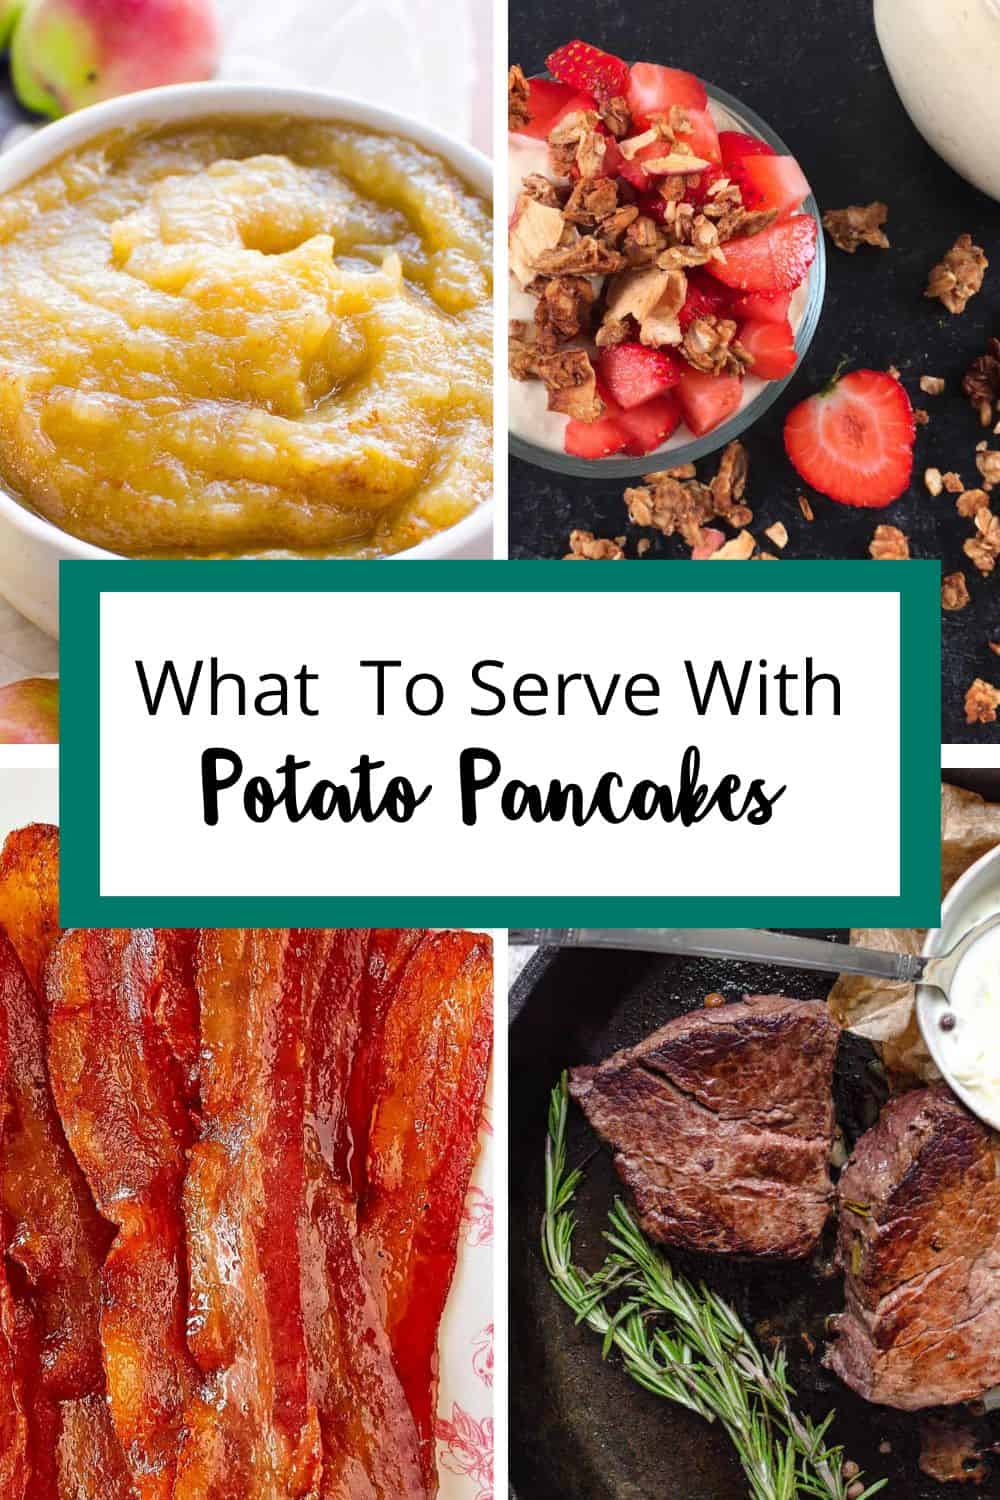 Collage of foods that can be served with potato pancakes. 